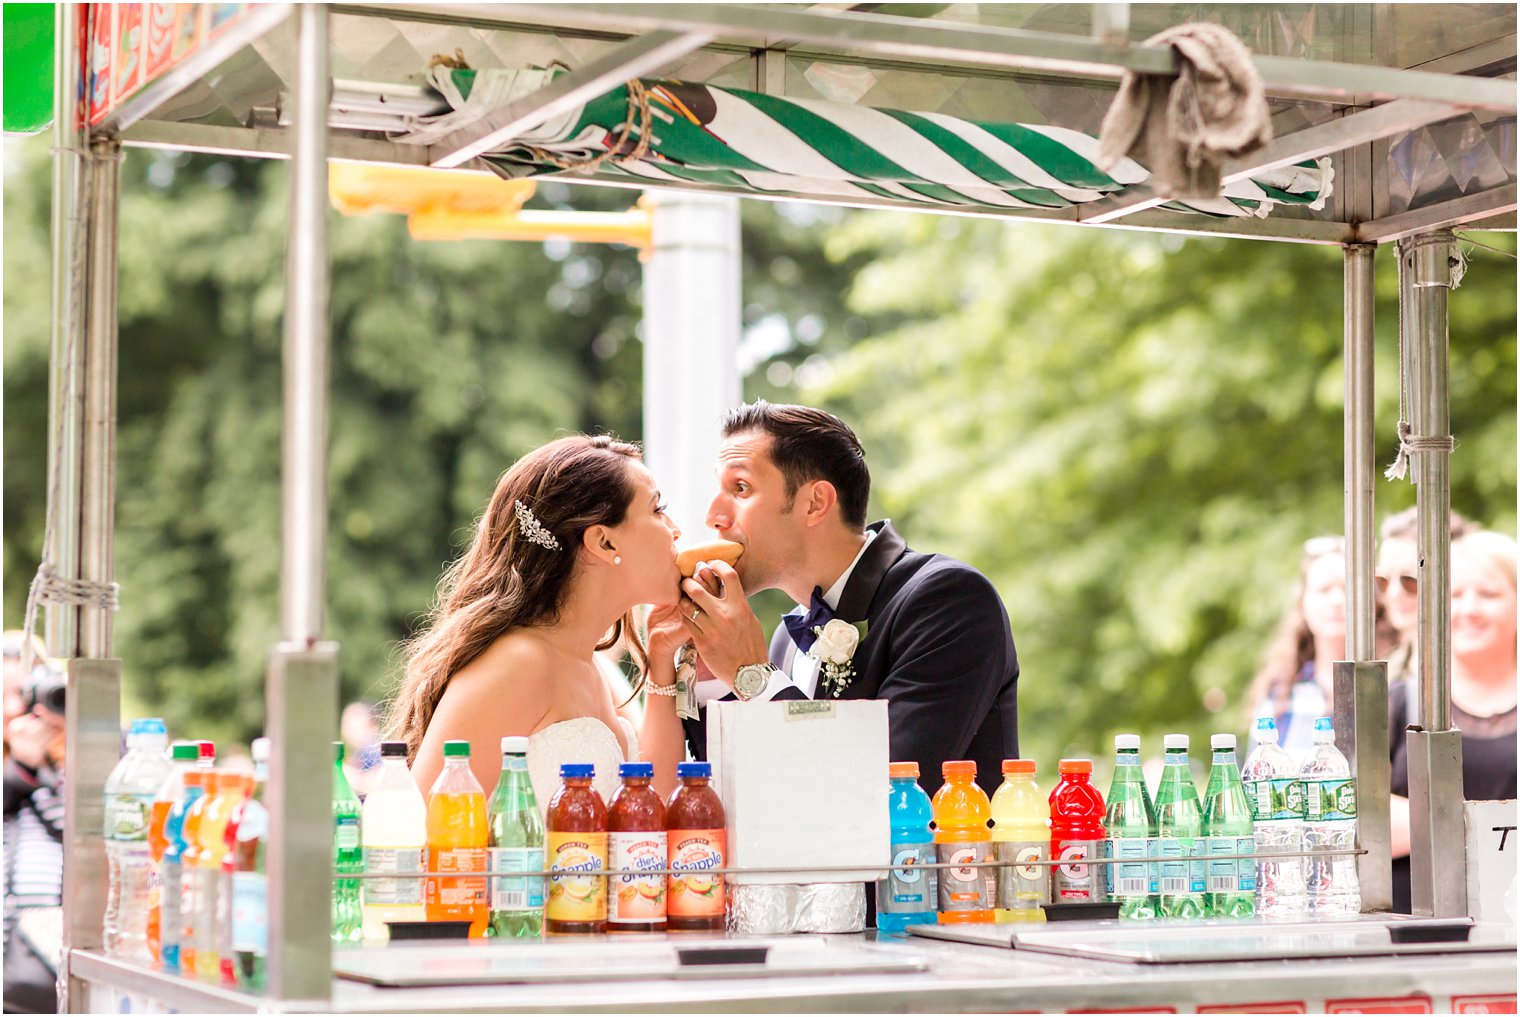 Bride and groom at hot dog stand | Photo by Idalia Photography